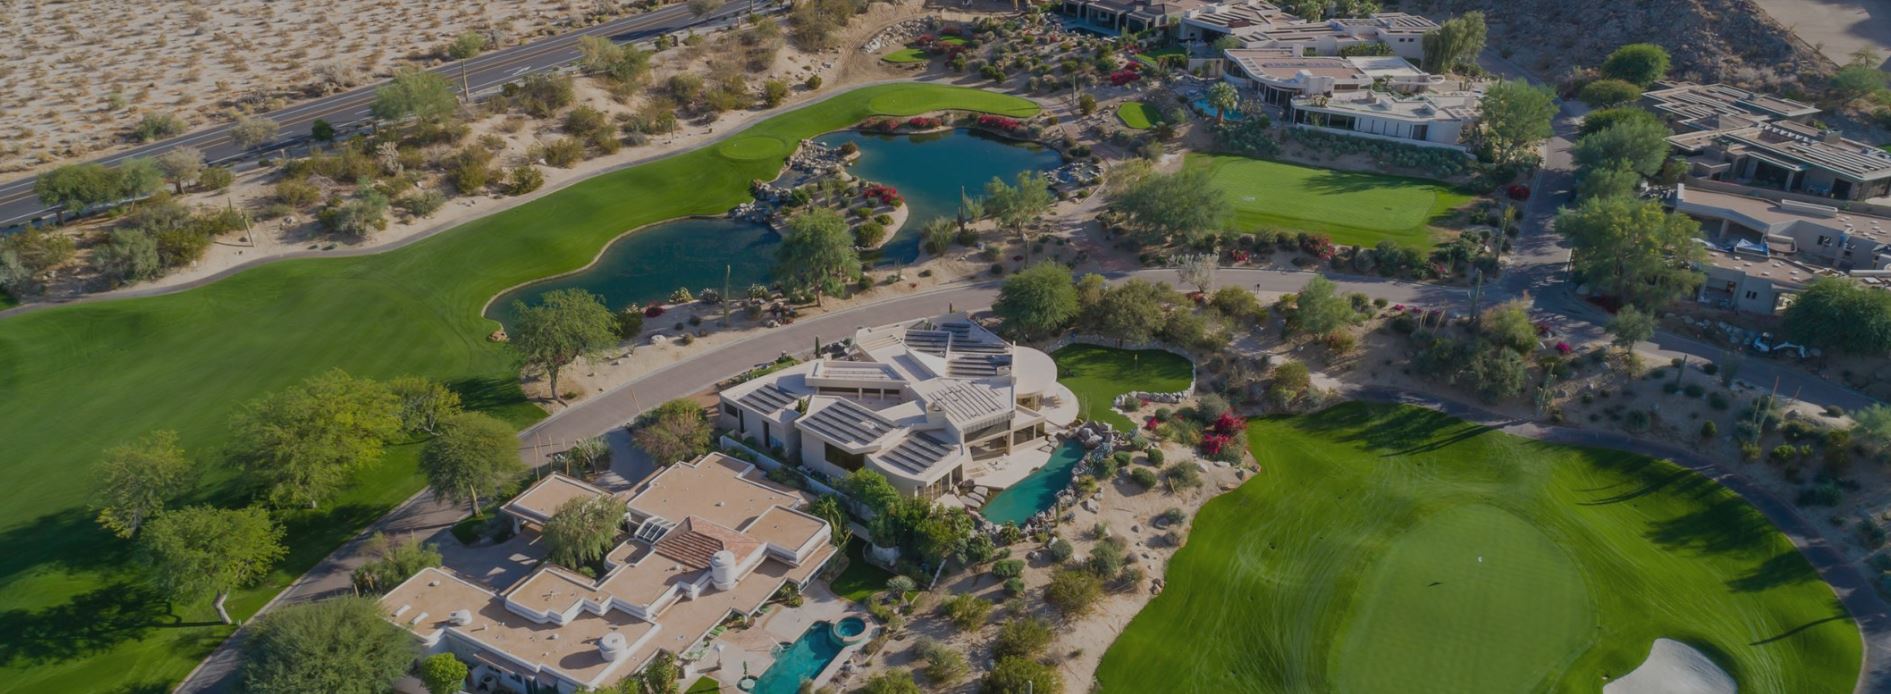 aerial photo of the big horn golf club. desert setting with a clubhouse and golf course nestled into the neutral colors of the desert's sand and landscape